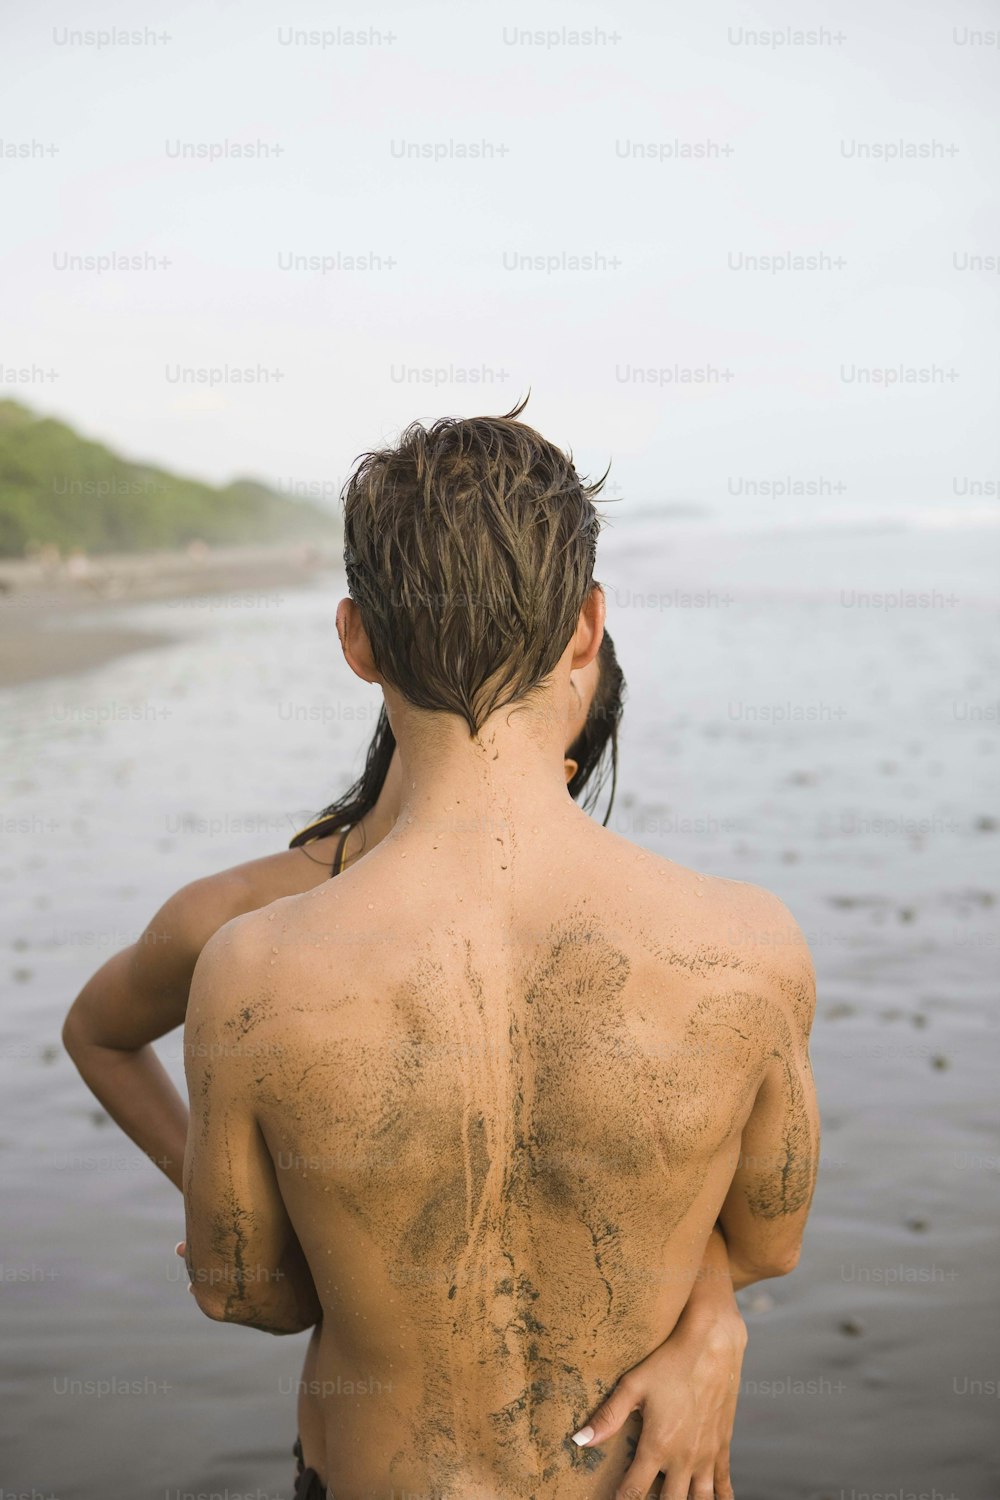 a man standing on a beach with his back to the camera